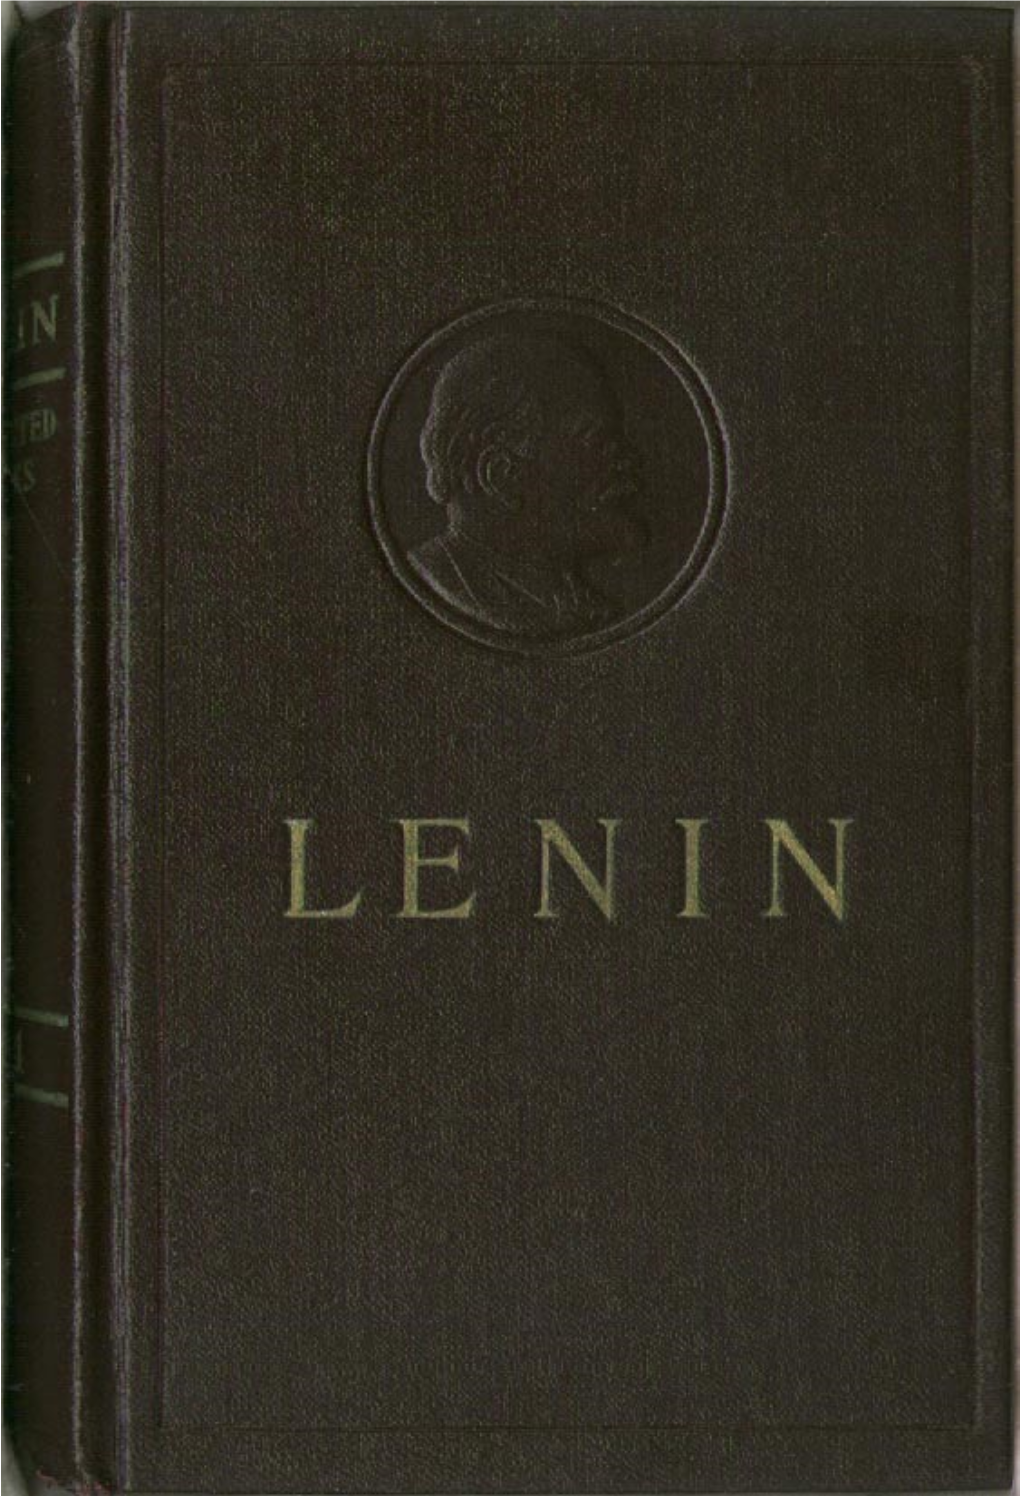 Collected Works of VI Lenin